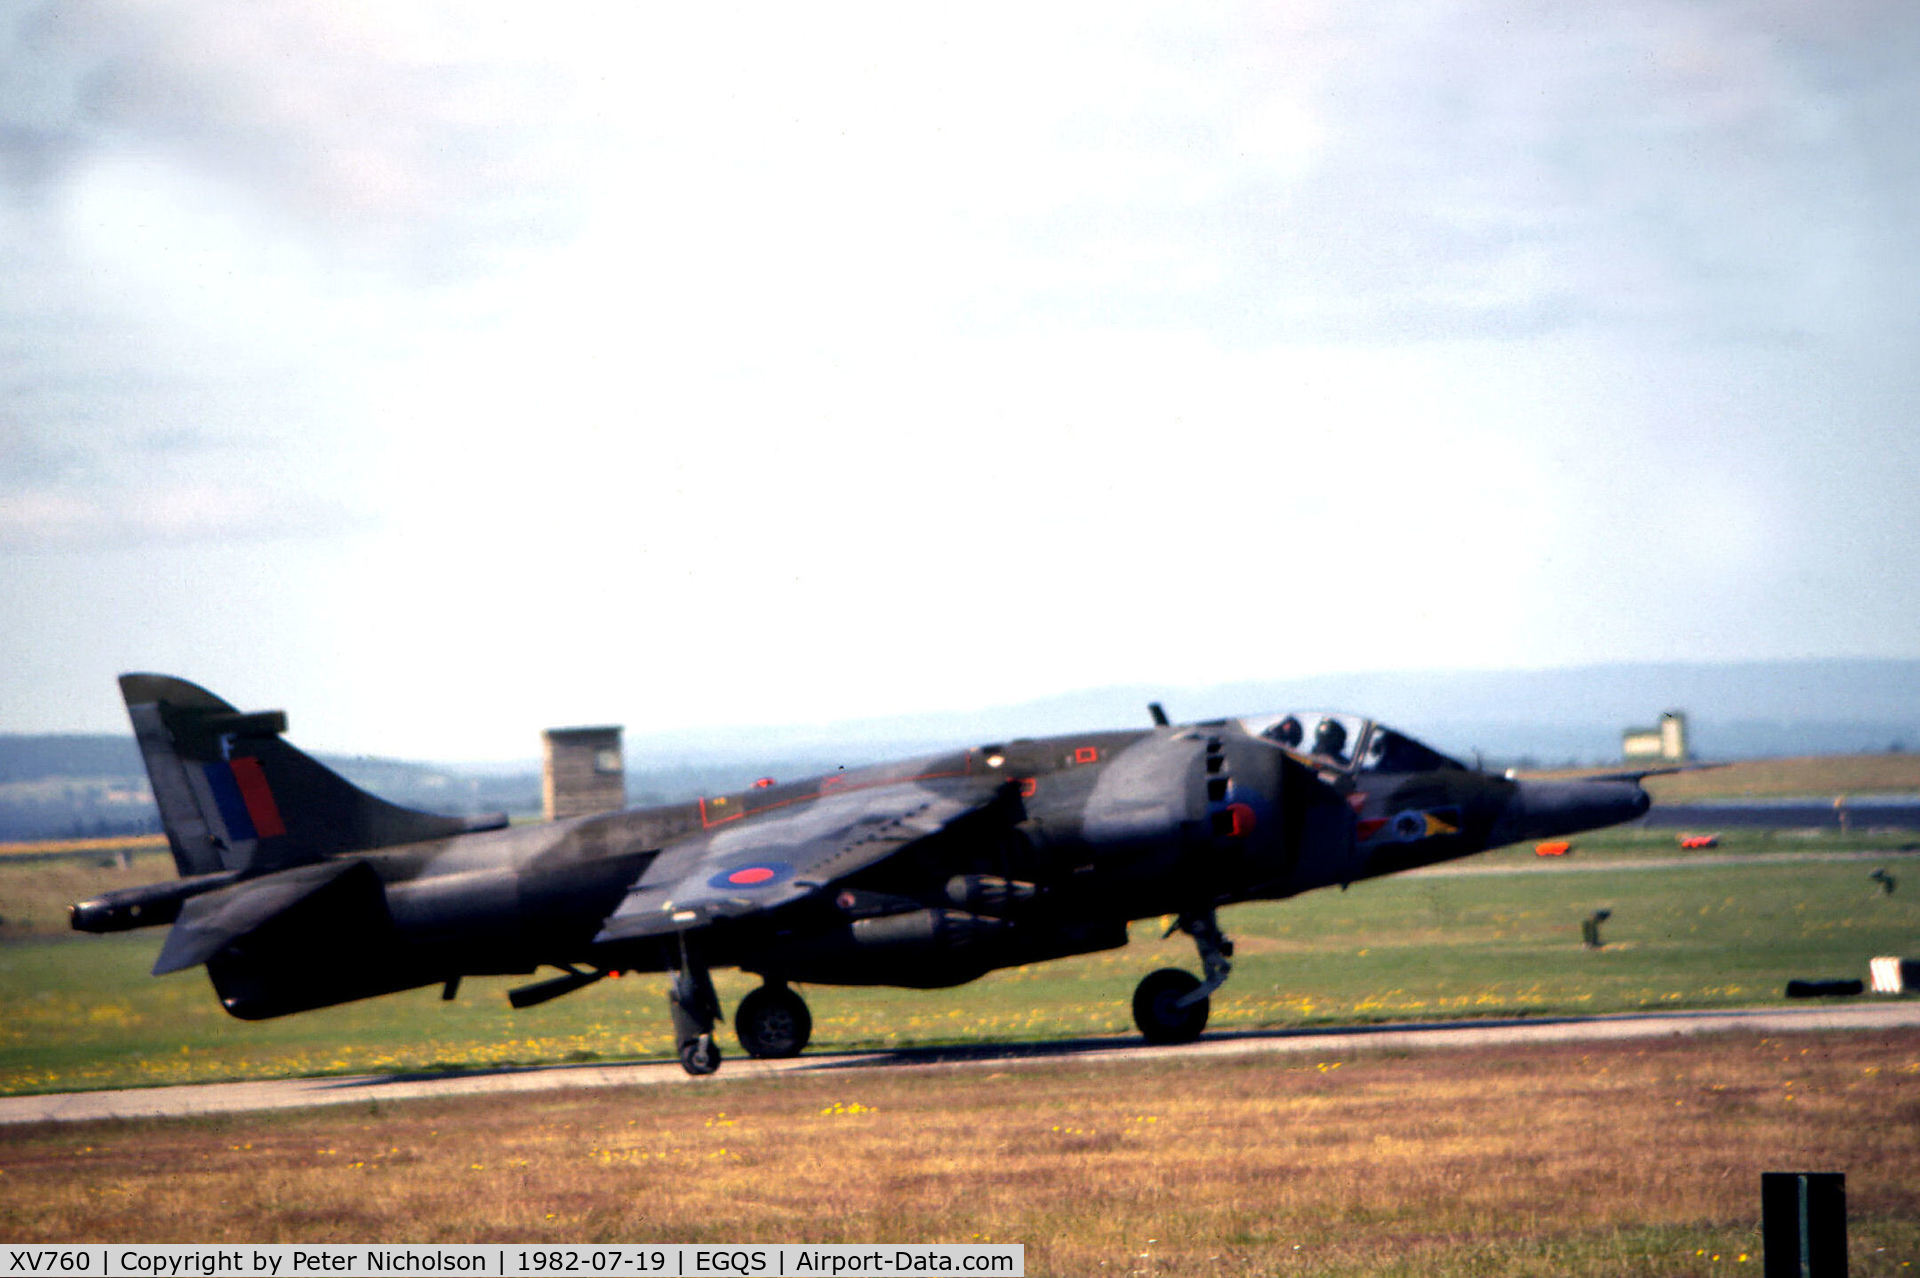 XV760, 1969 Hawker Siddeley Harrier GR.3 C/N 712023, Harrier GR.3 of 233 Operational Conversion Unit preparing to depart from RAF Lossiemouth in the Summer of 1982.